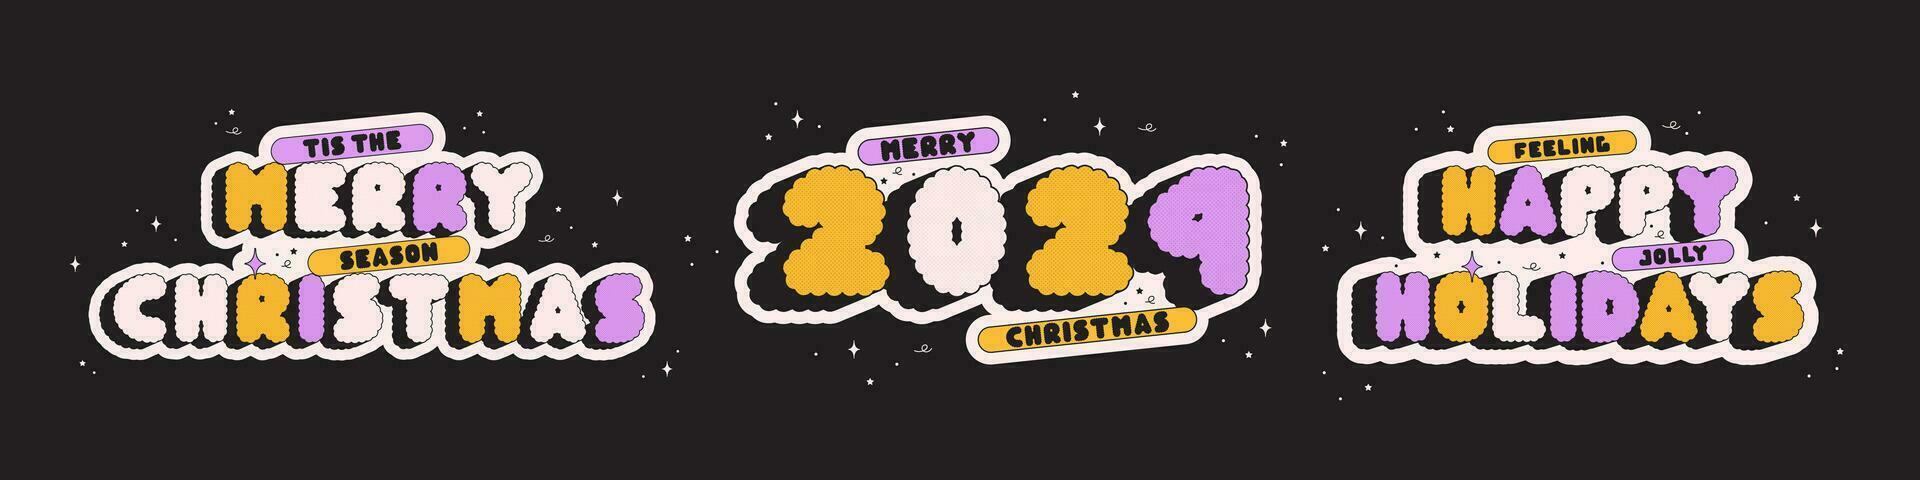 Groovy Christmas halftone Sticker set. Yellow and purple letters. vector